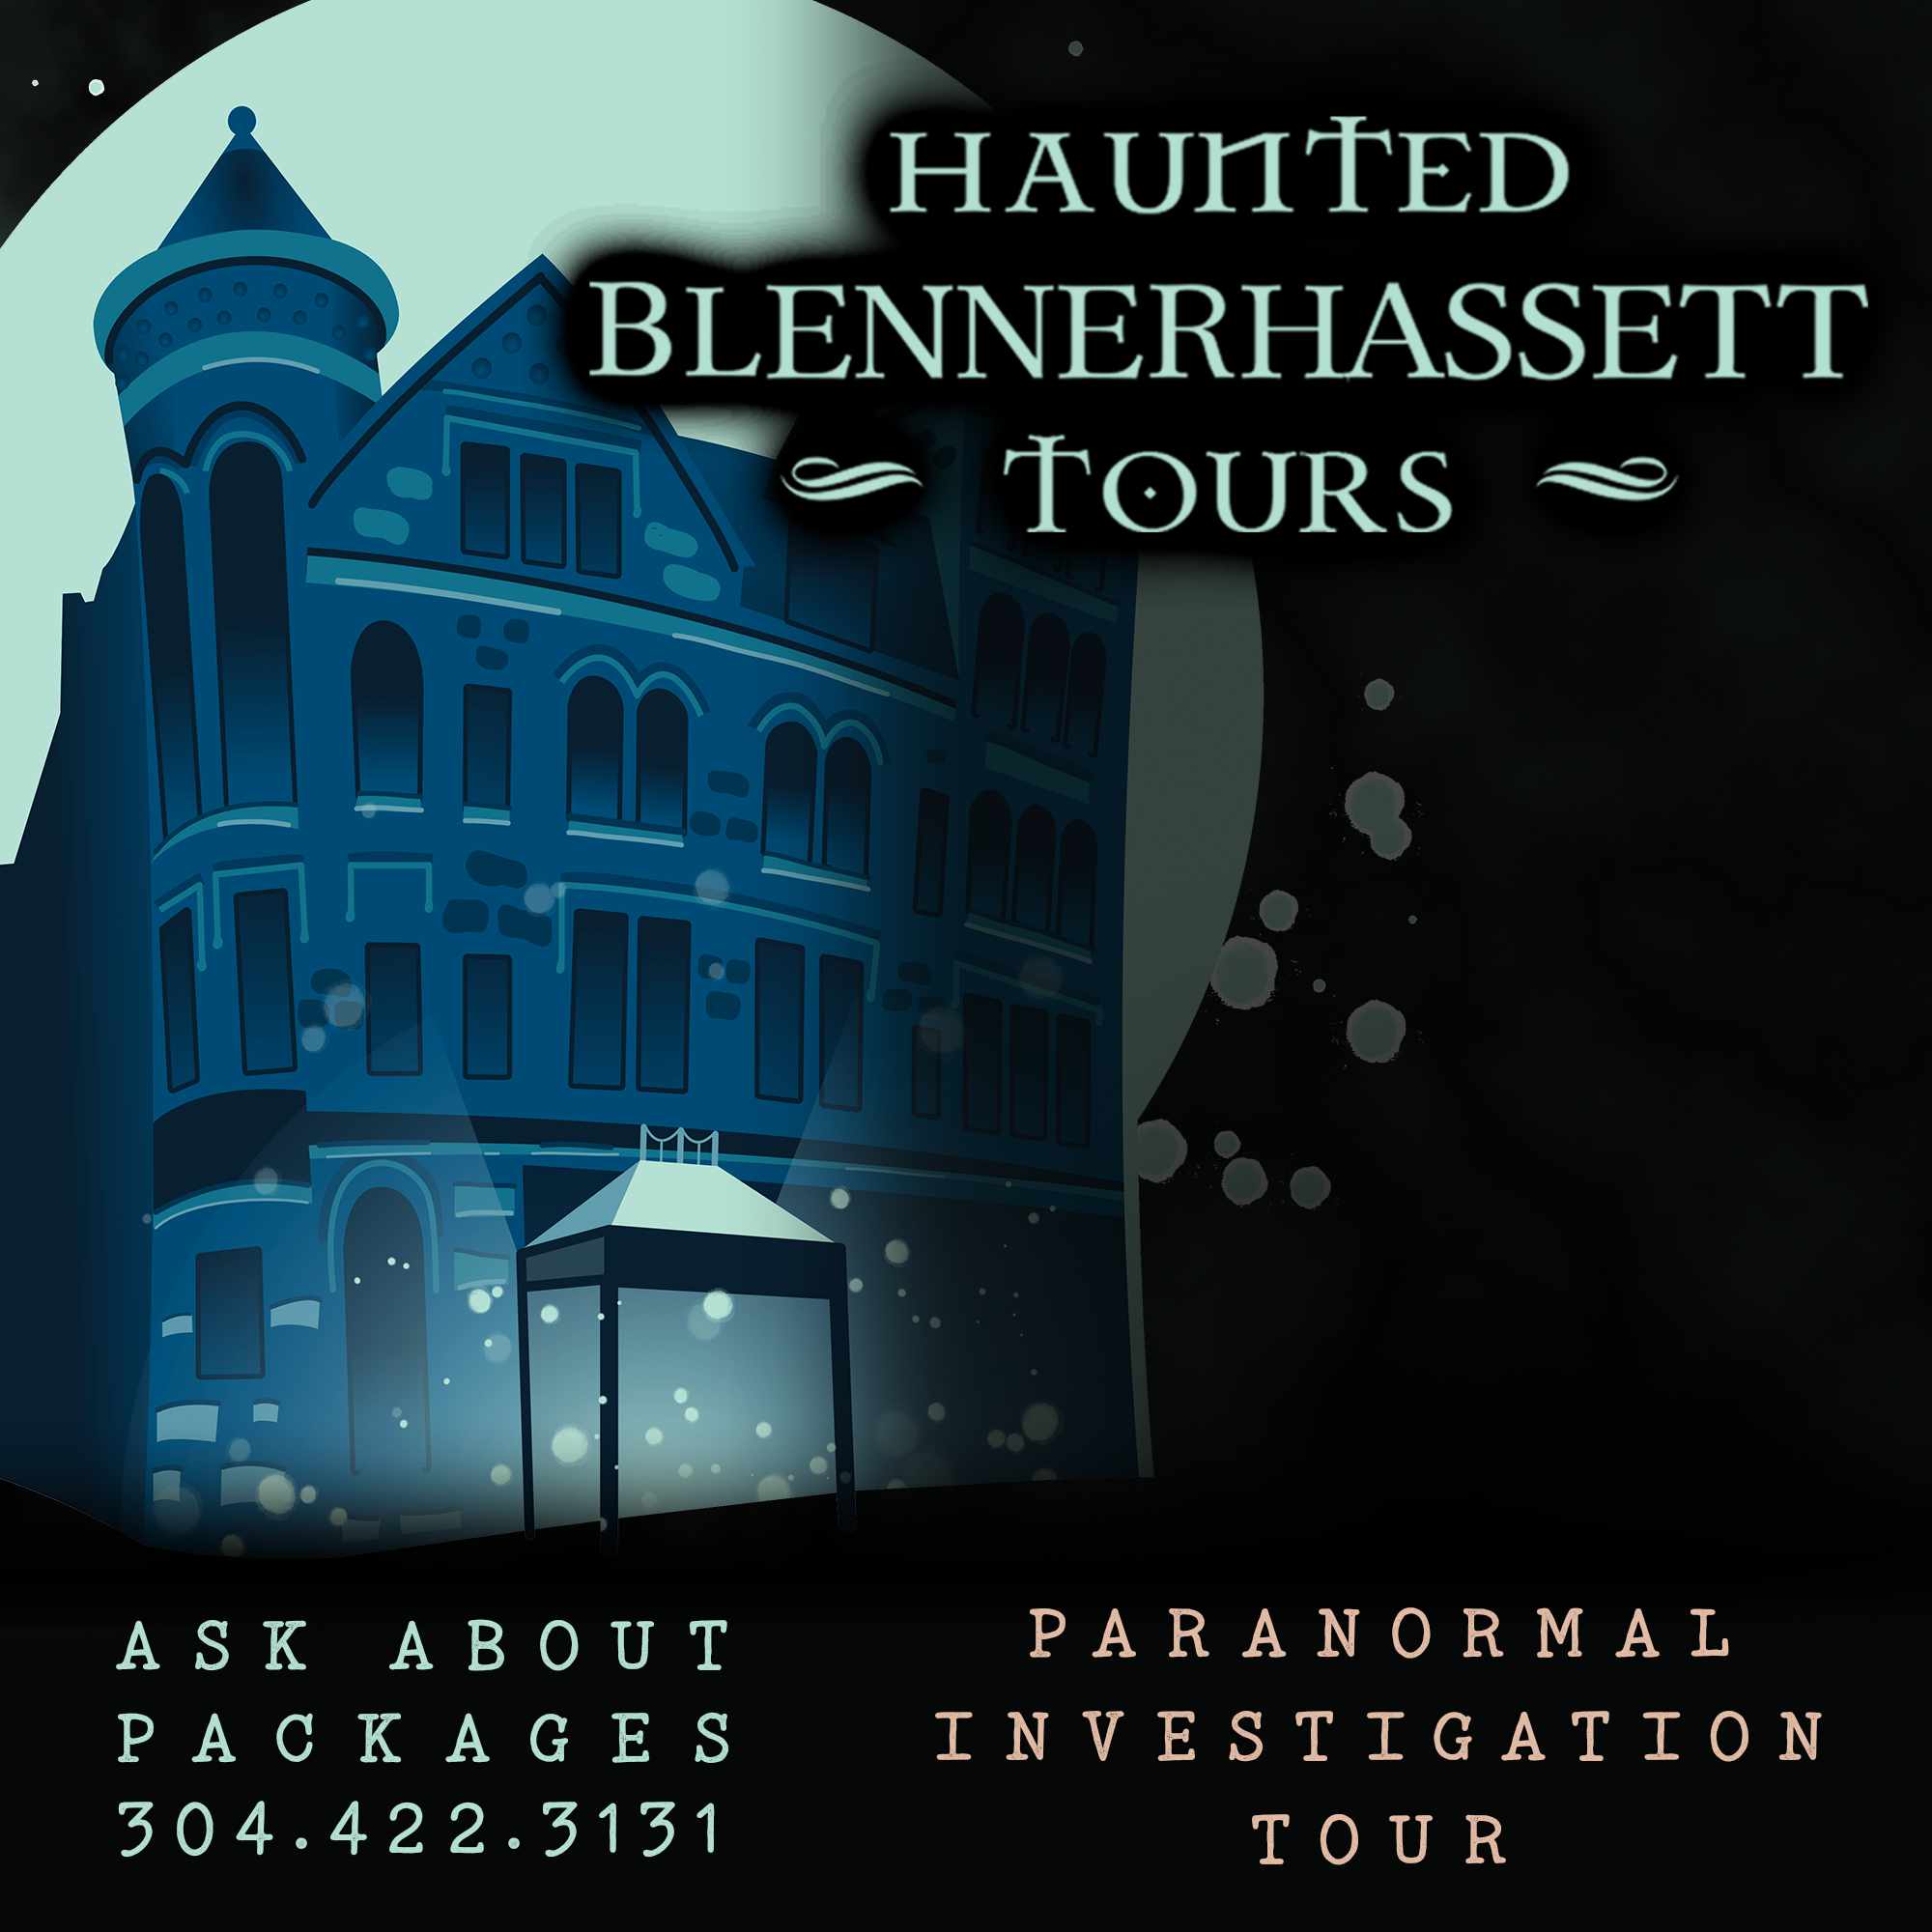 Haunted Blennerhassett Tours. Ask about Packages 304.422.3131